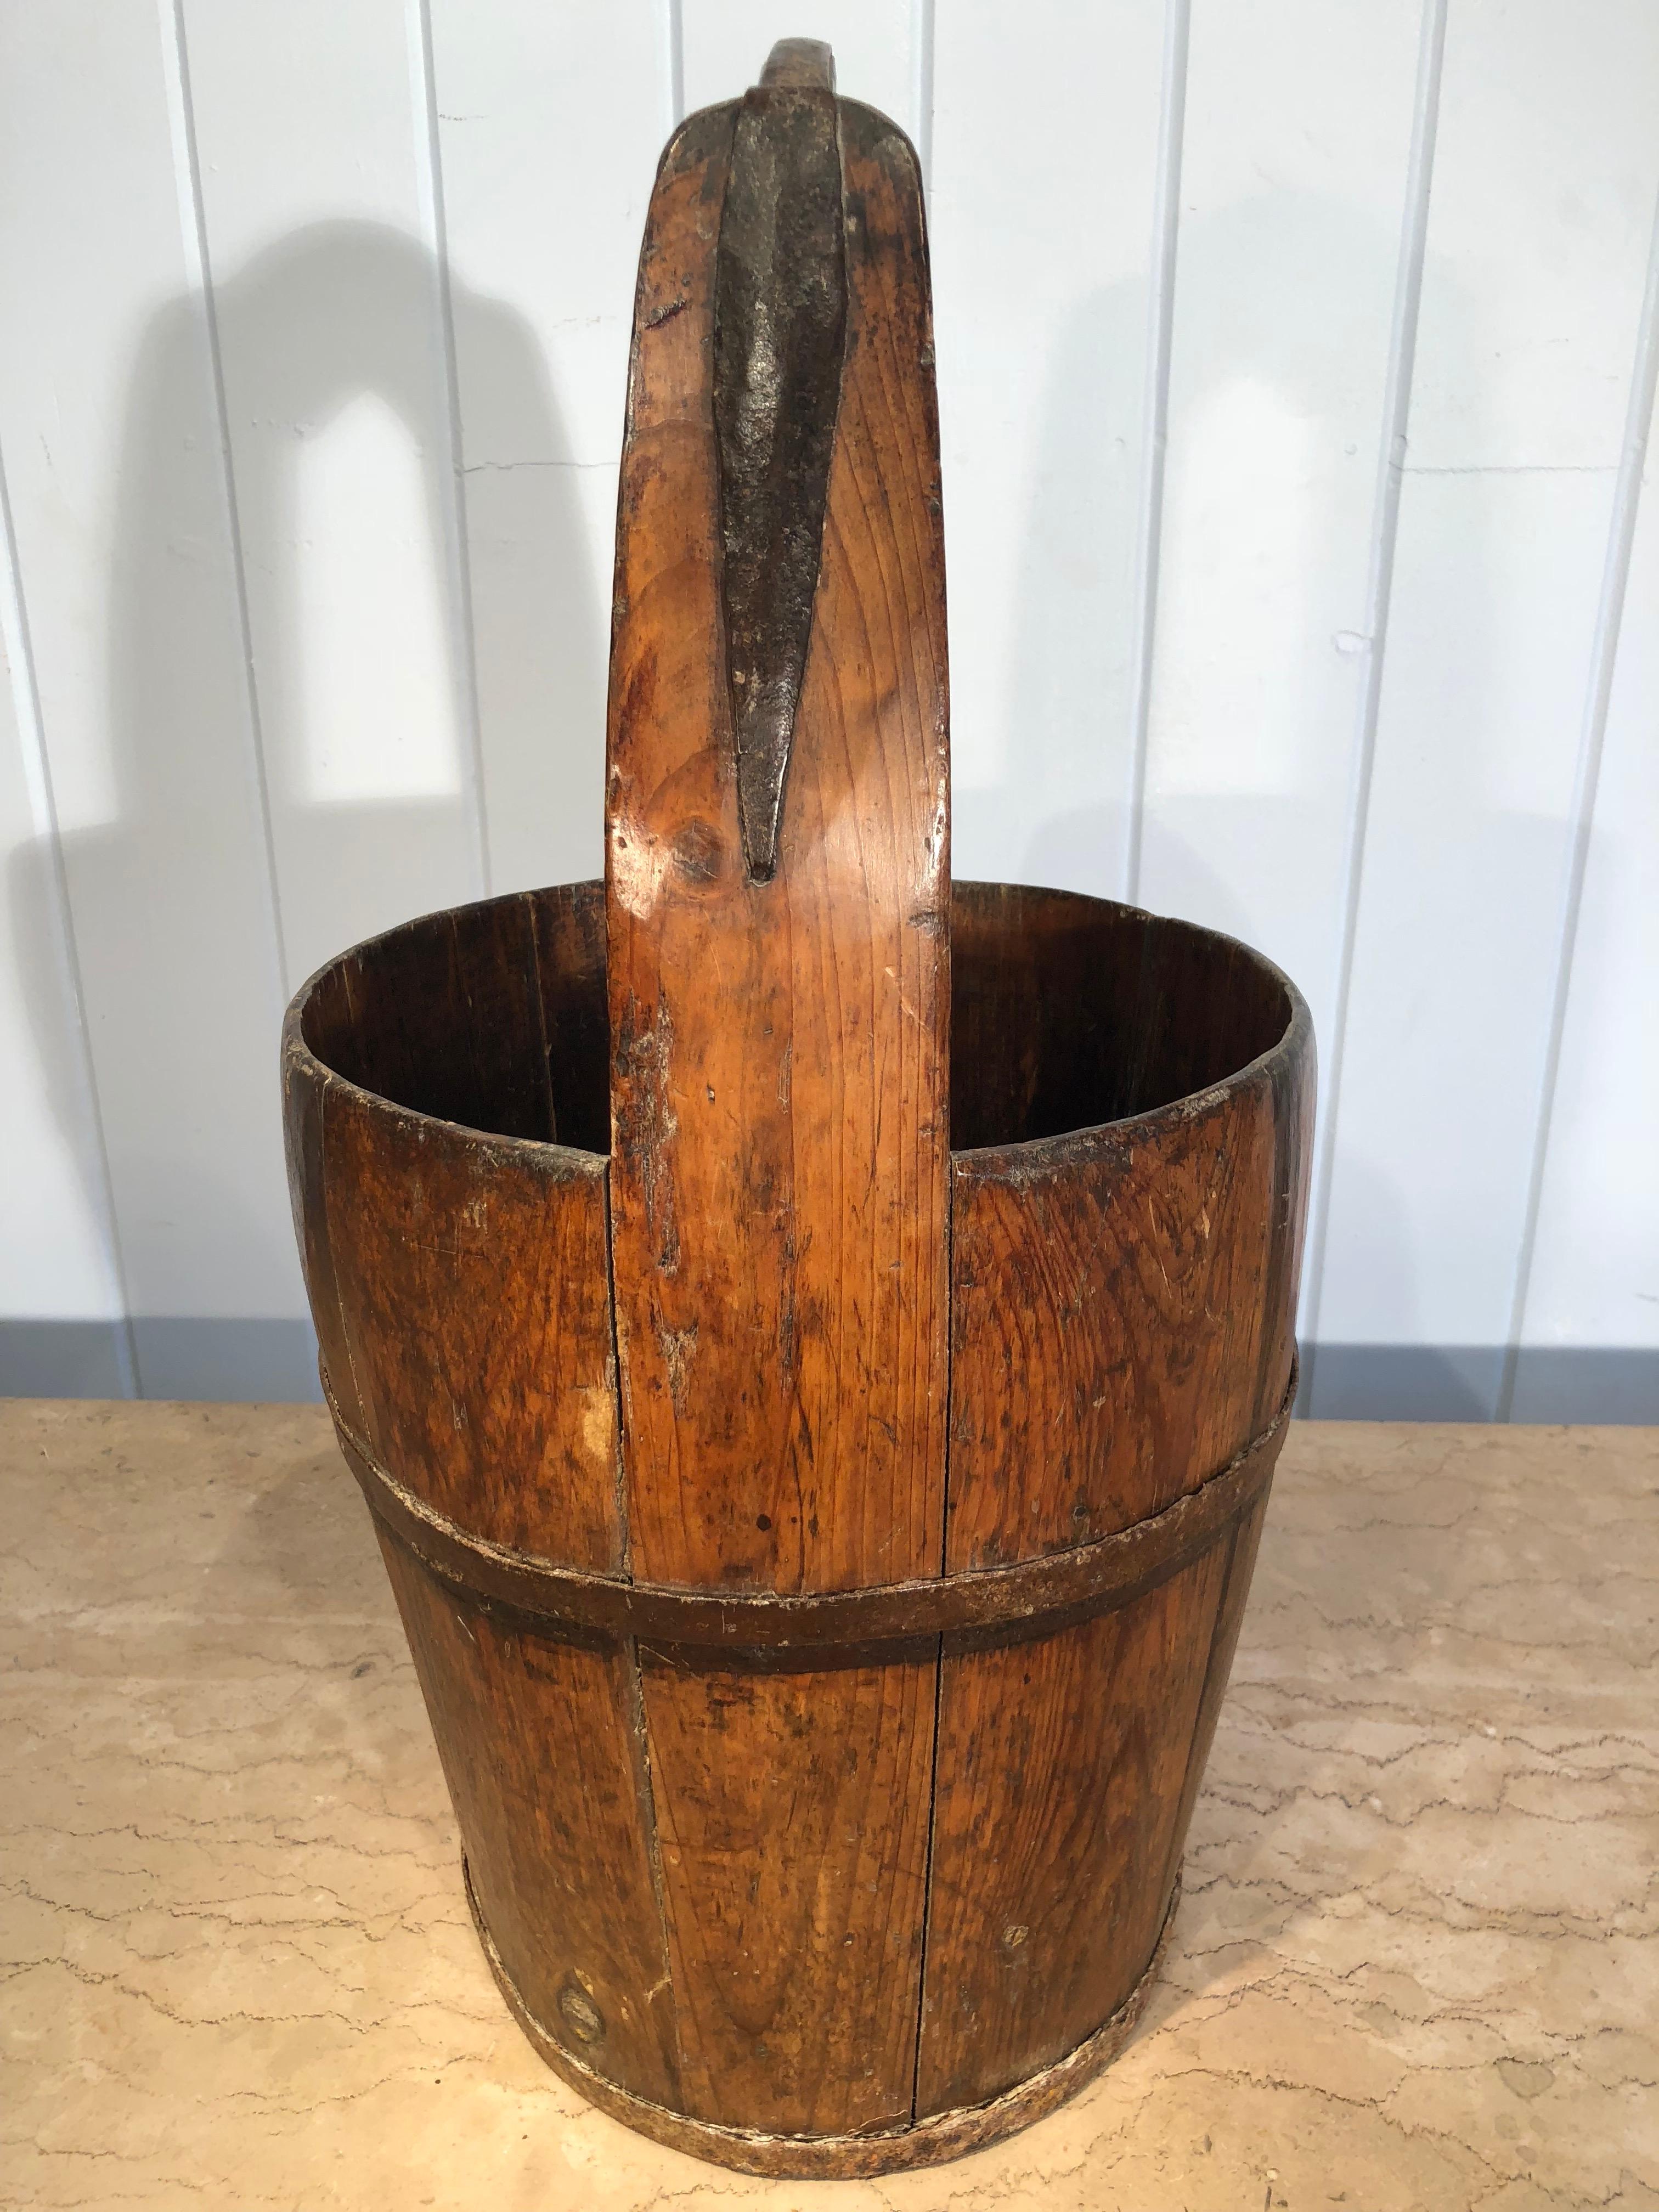 We found two of these lovely hand-made oak milk buckets at our local brocante in Tournon d'Agenais, and they are beauties. We have cleaned and polished them so their deep lustrous patina shows to their best effect. They would make great decorative